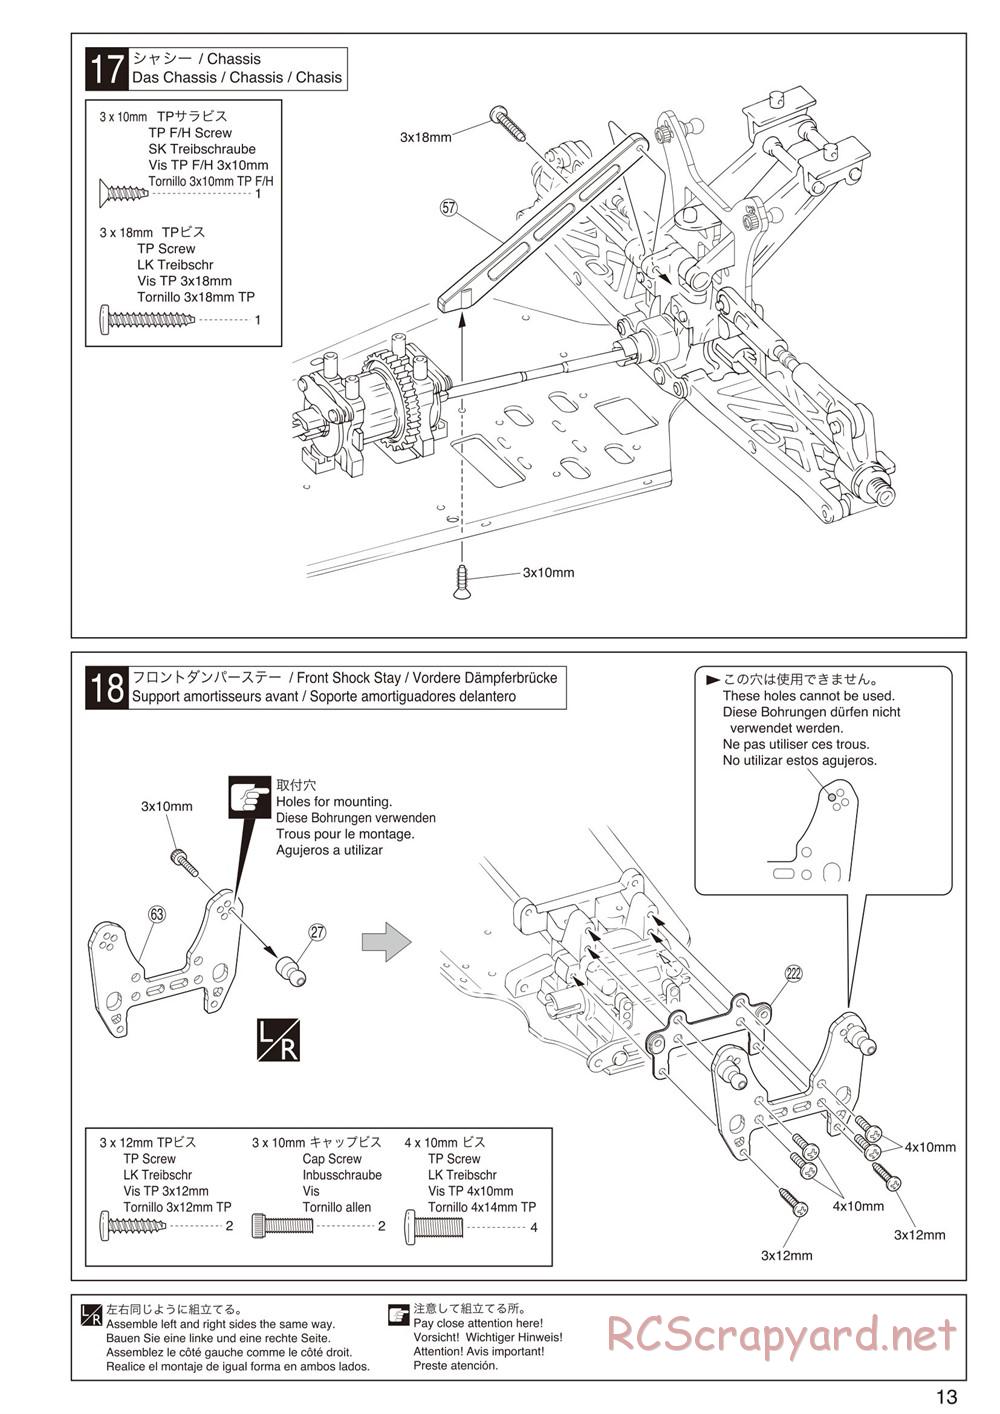 Kyosho - Inferno Neo 2.0 - Manual - Page 13